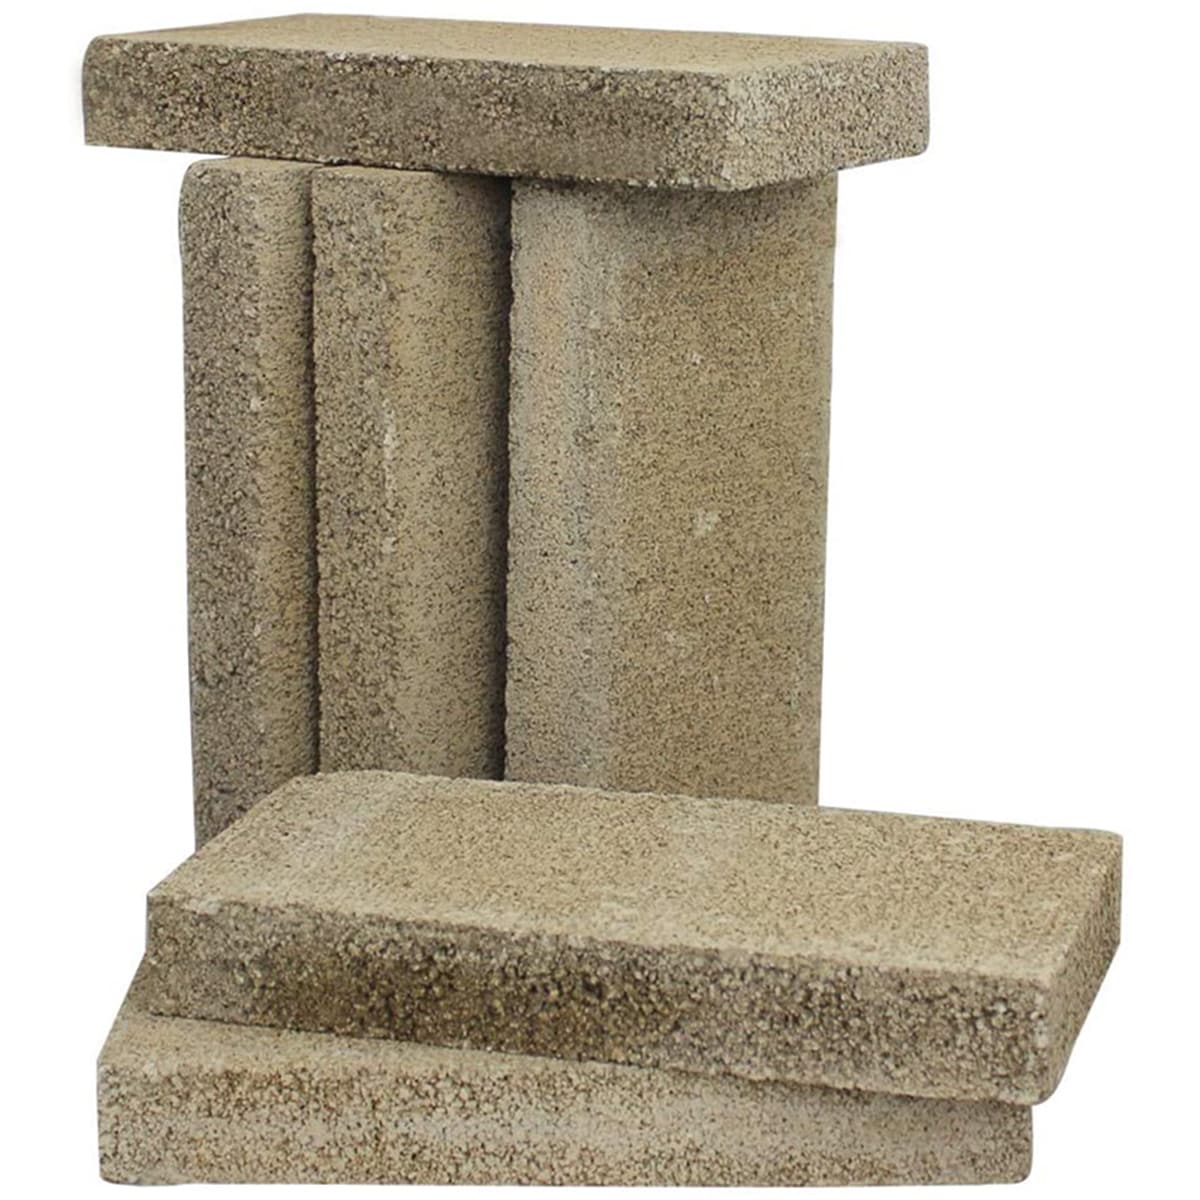 Pumice Firebrick For Stoves and Fireplaces (8 x 4.5 x 1.25”) PUMICE